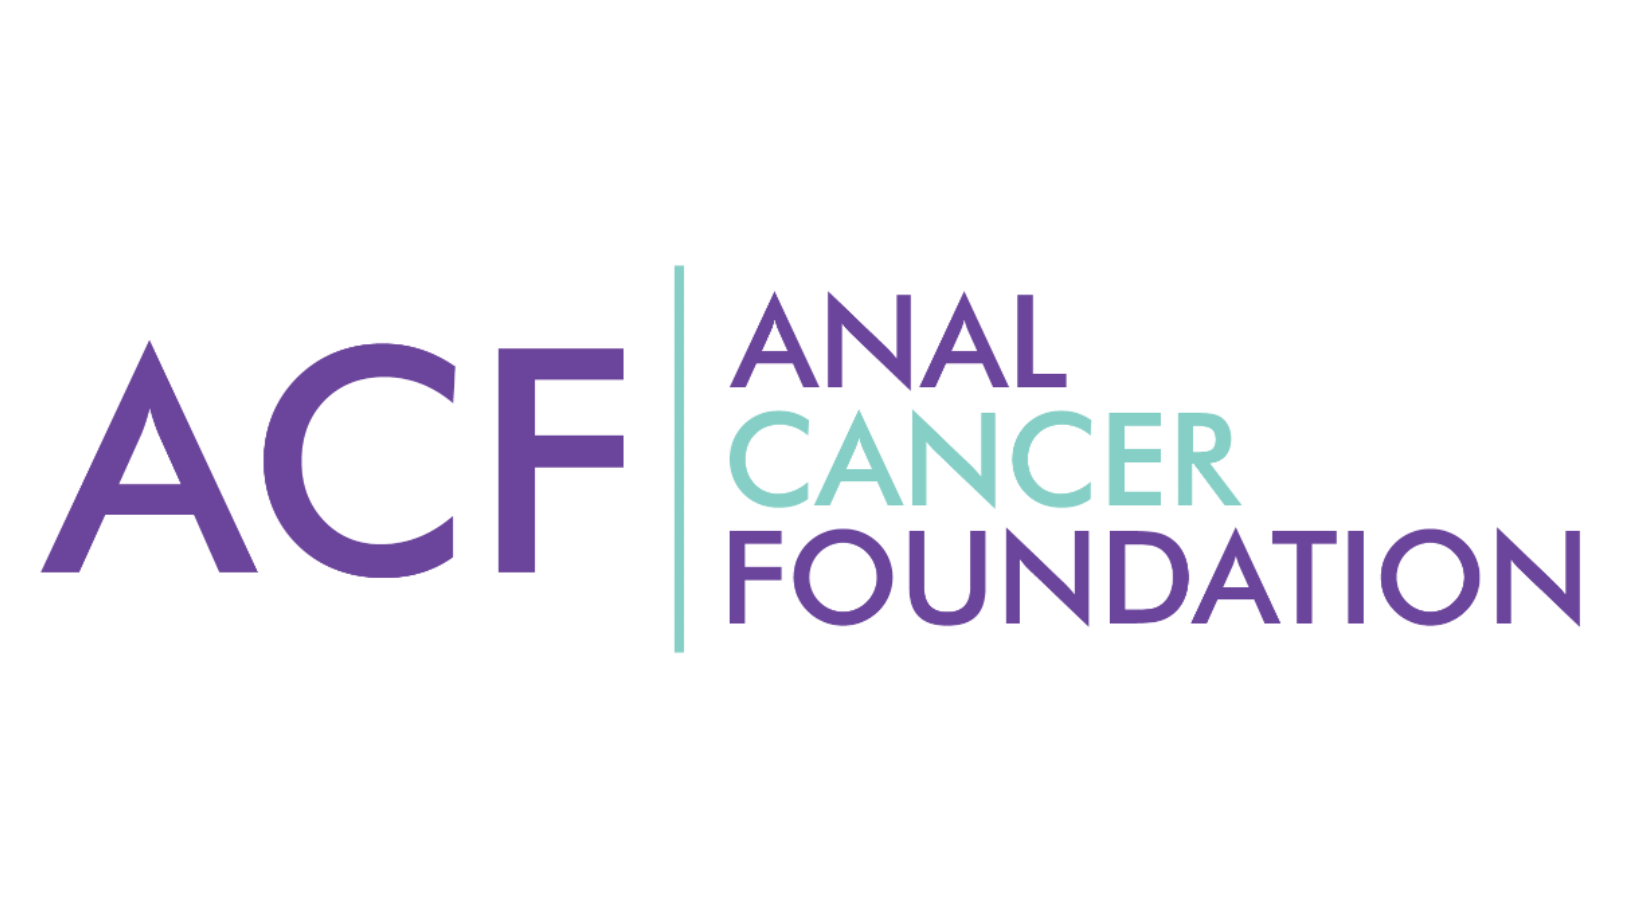 The_Anal_Cancer_Foundation_logo